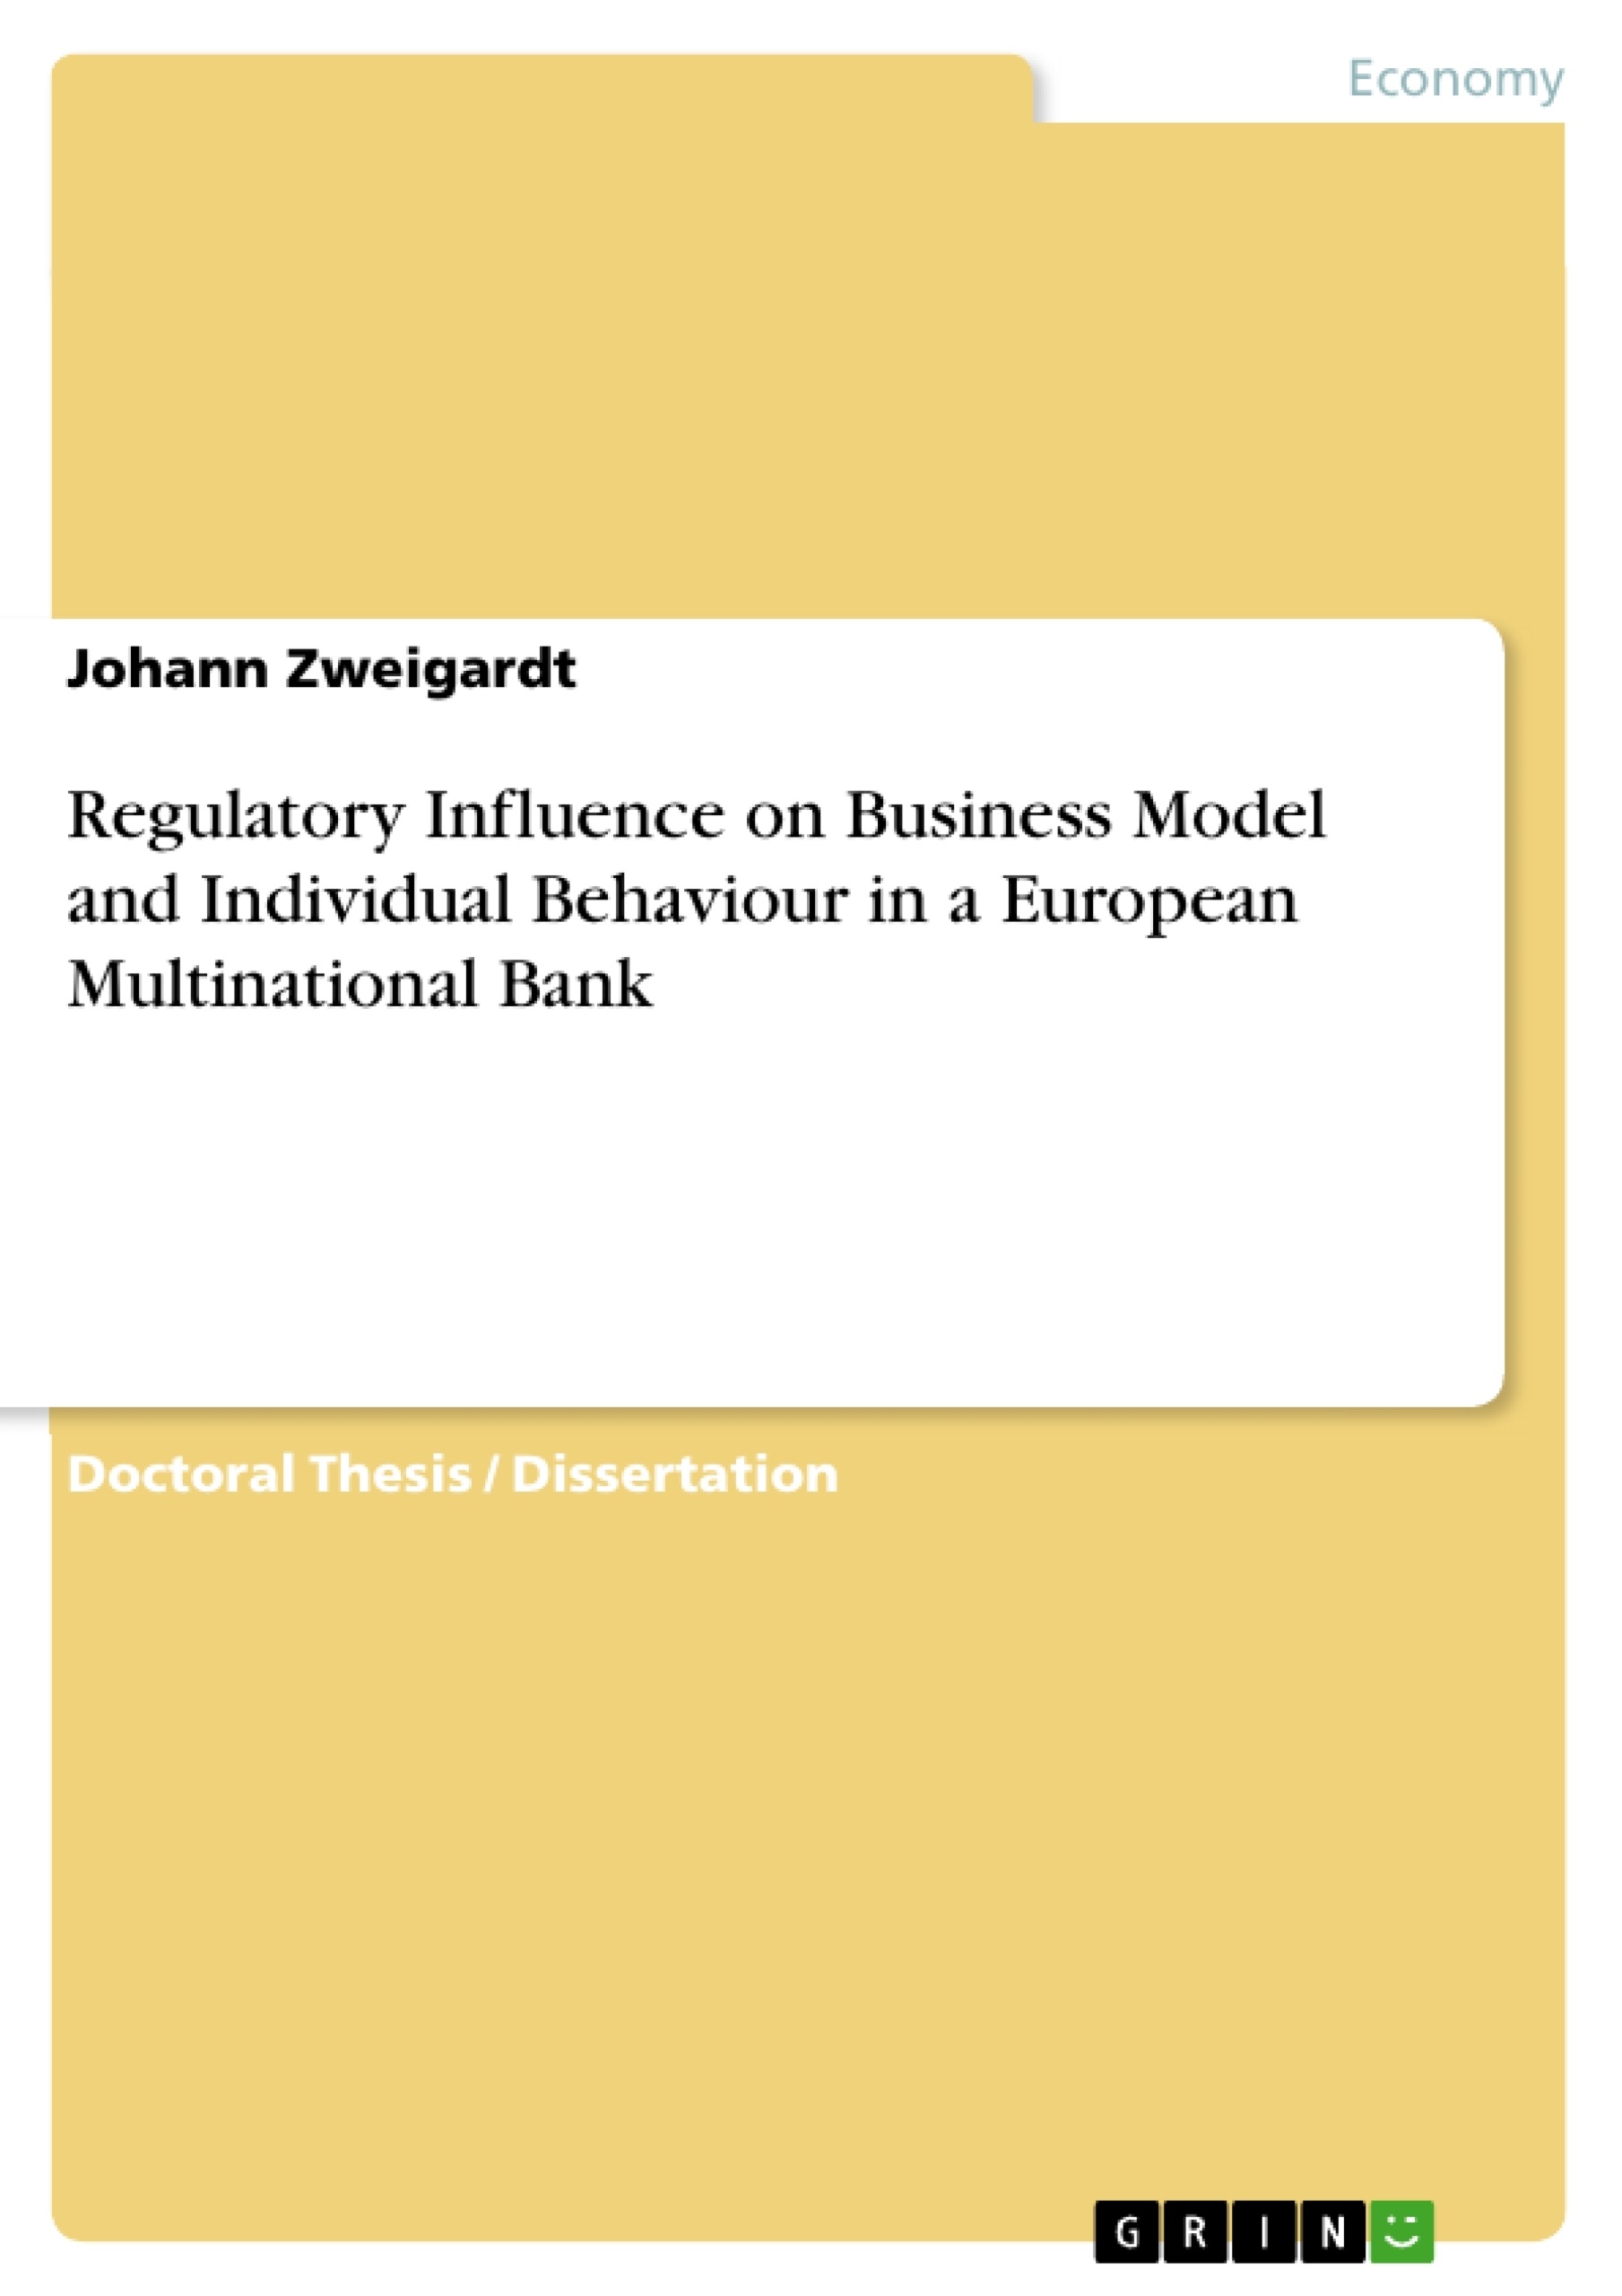 Título: Regulatory Influence on Business Model and Individual Behaviour in a European Multinational Bank